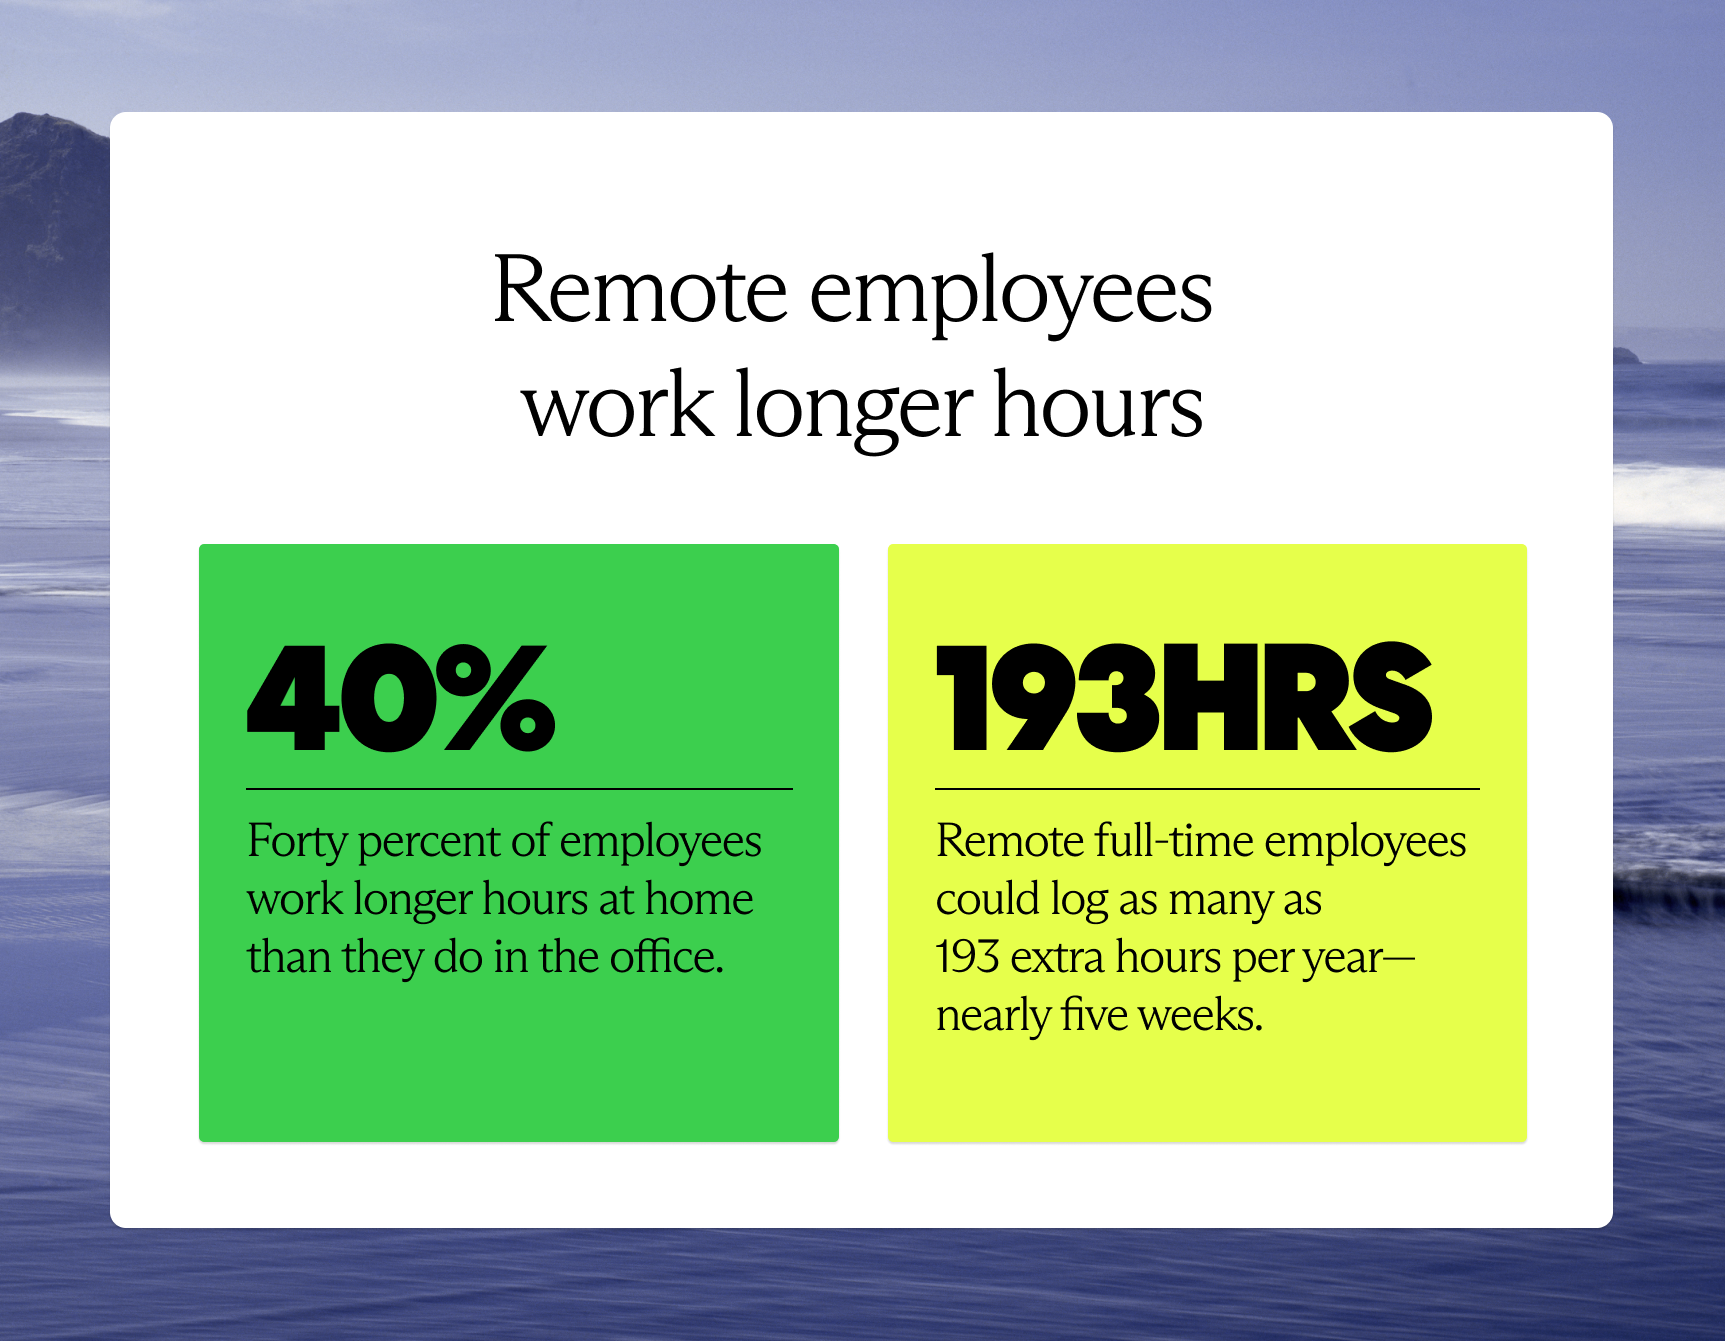 Remote employees work longer hours